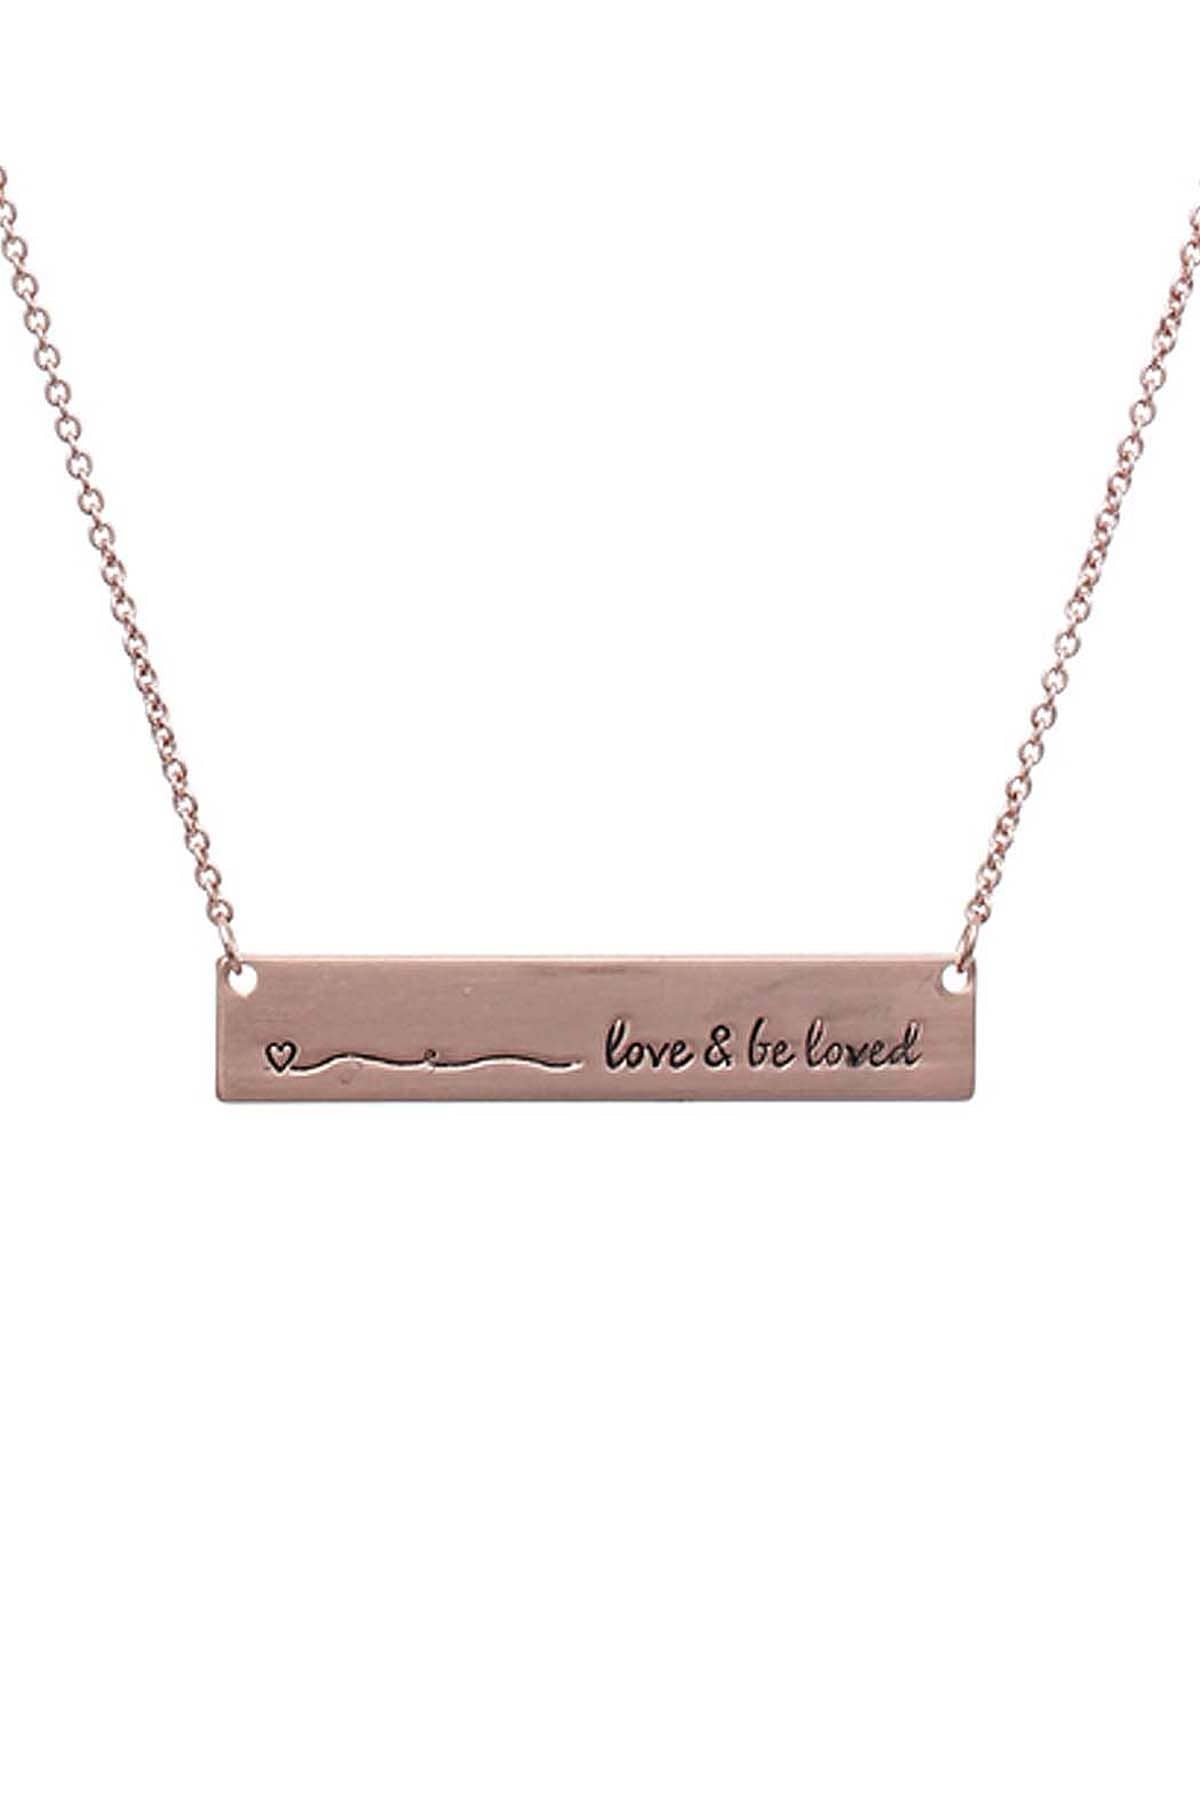 16430 - BAR LOVE AND BE LOVED NECKLACE: ROSE GOLD